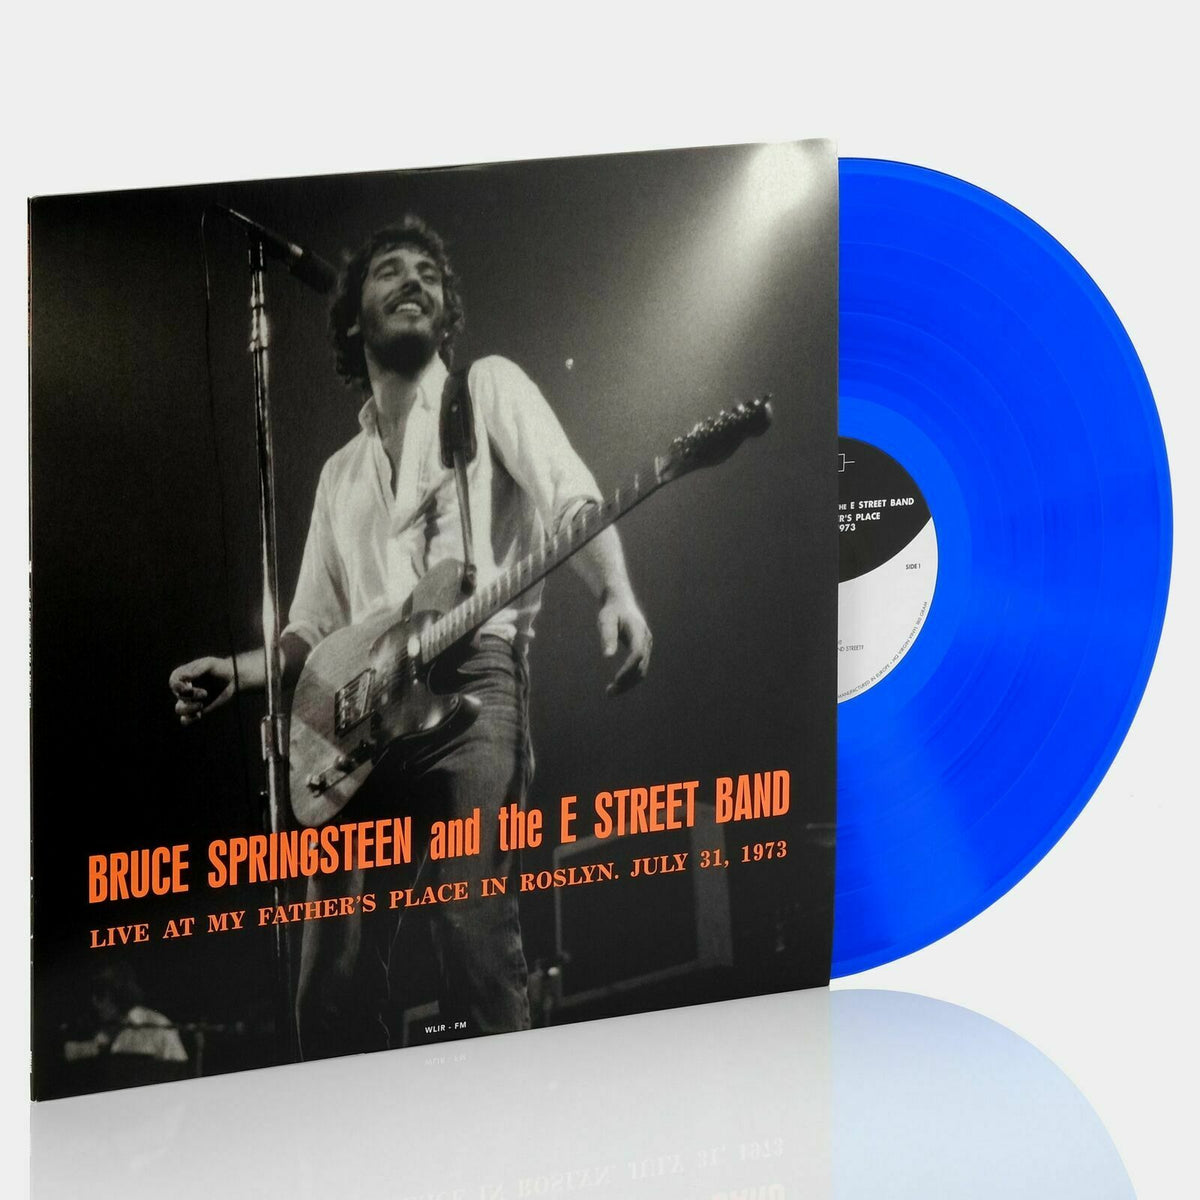 Bruce Springsteen - Live At My Fathers Place In Roslyn Ny July 31 1973 Wlir-Fm (Blue Vinyl)